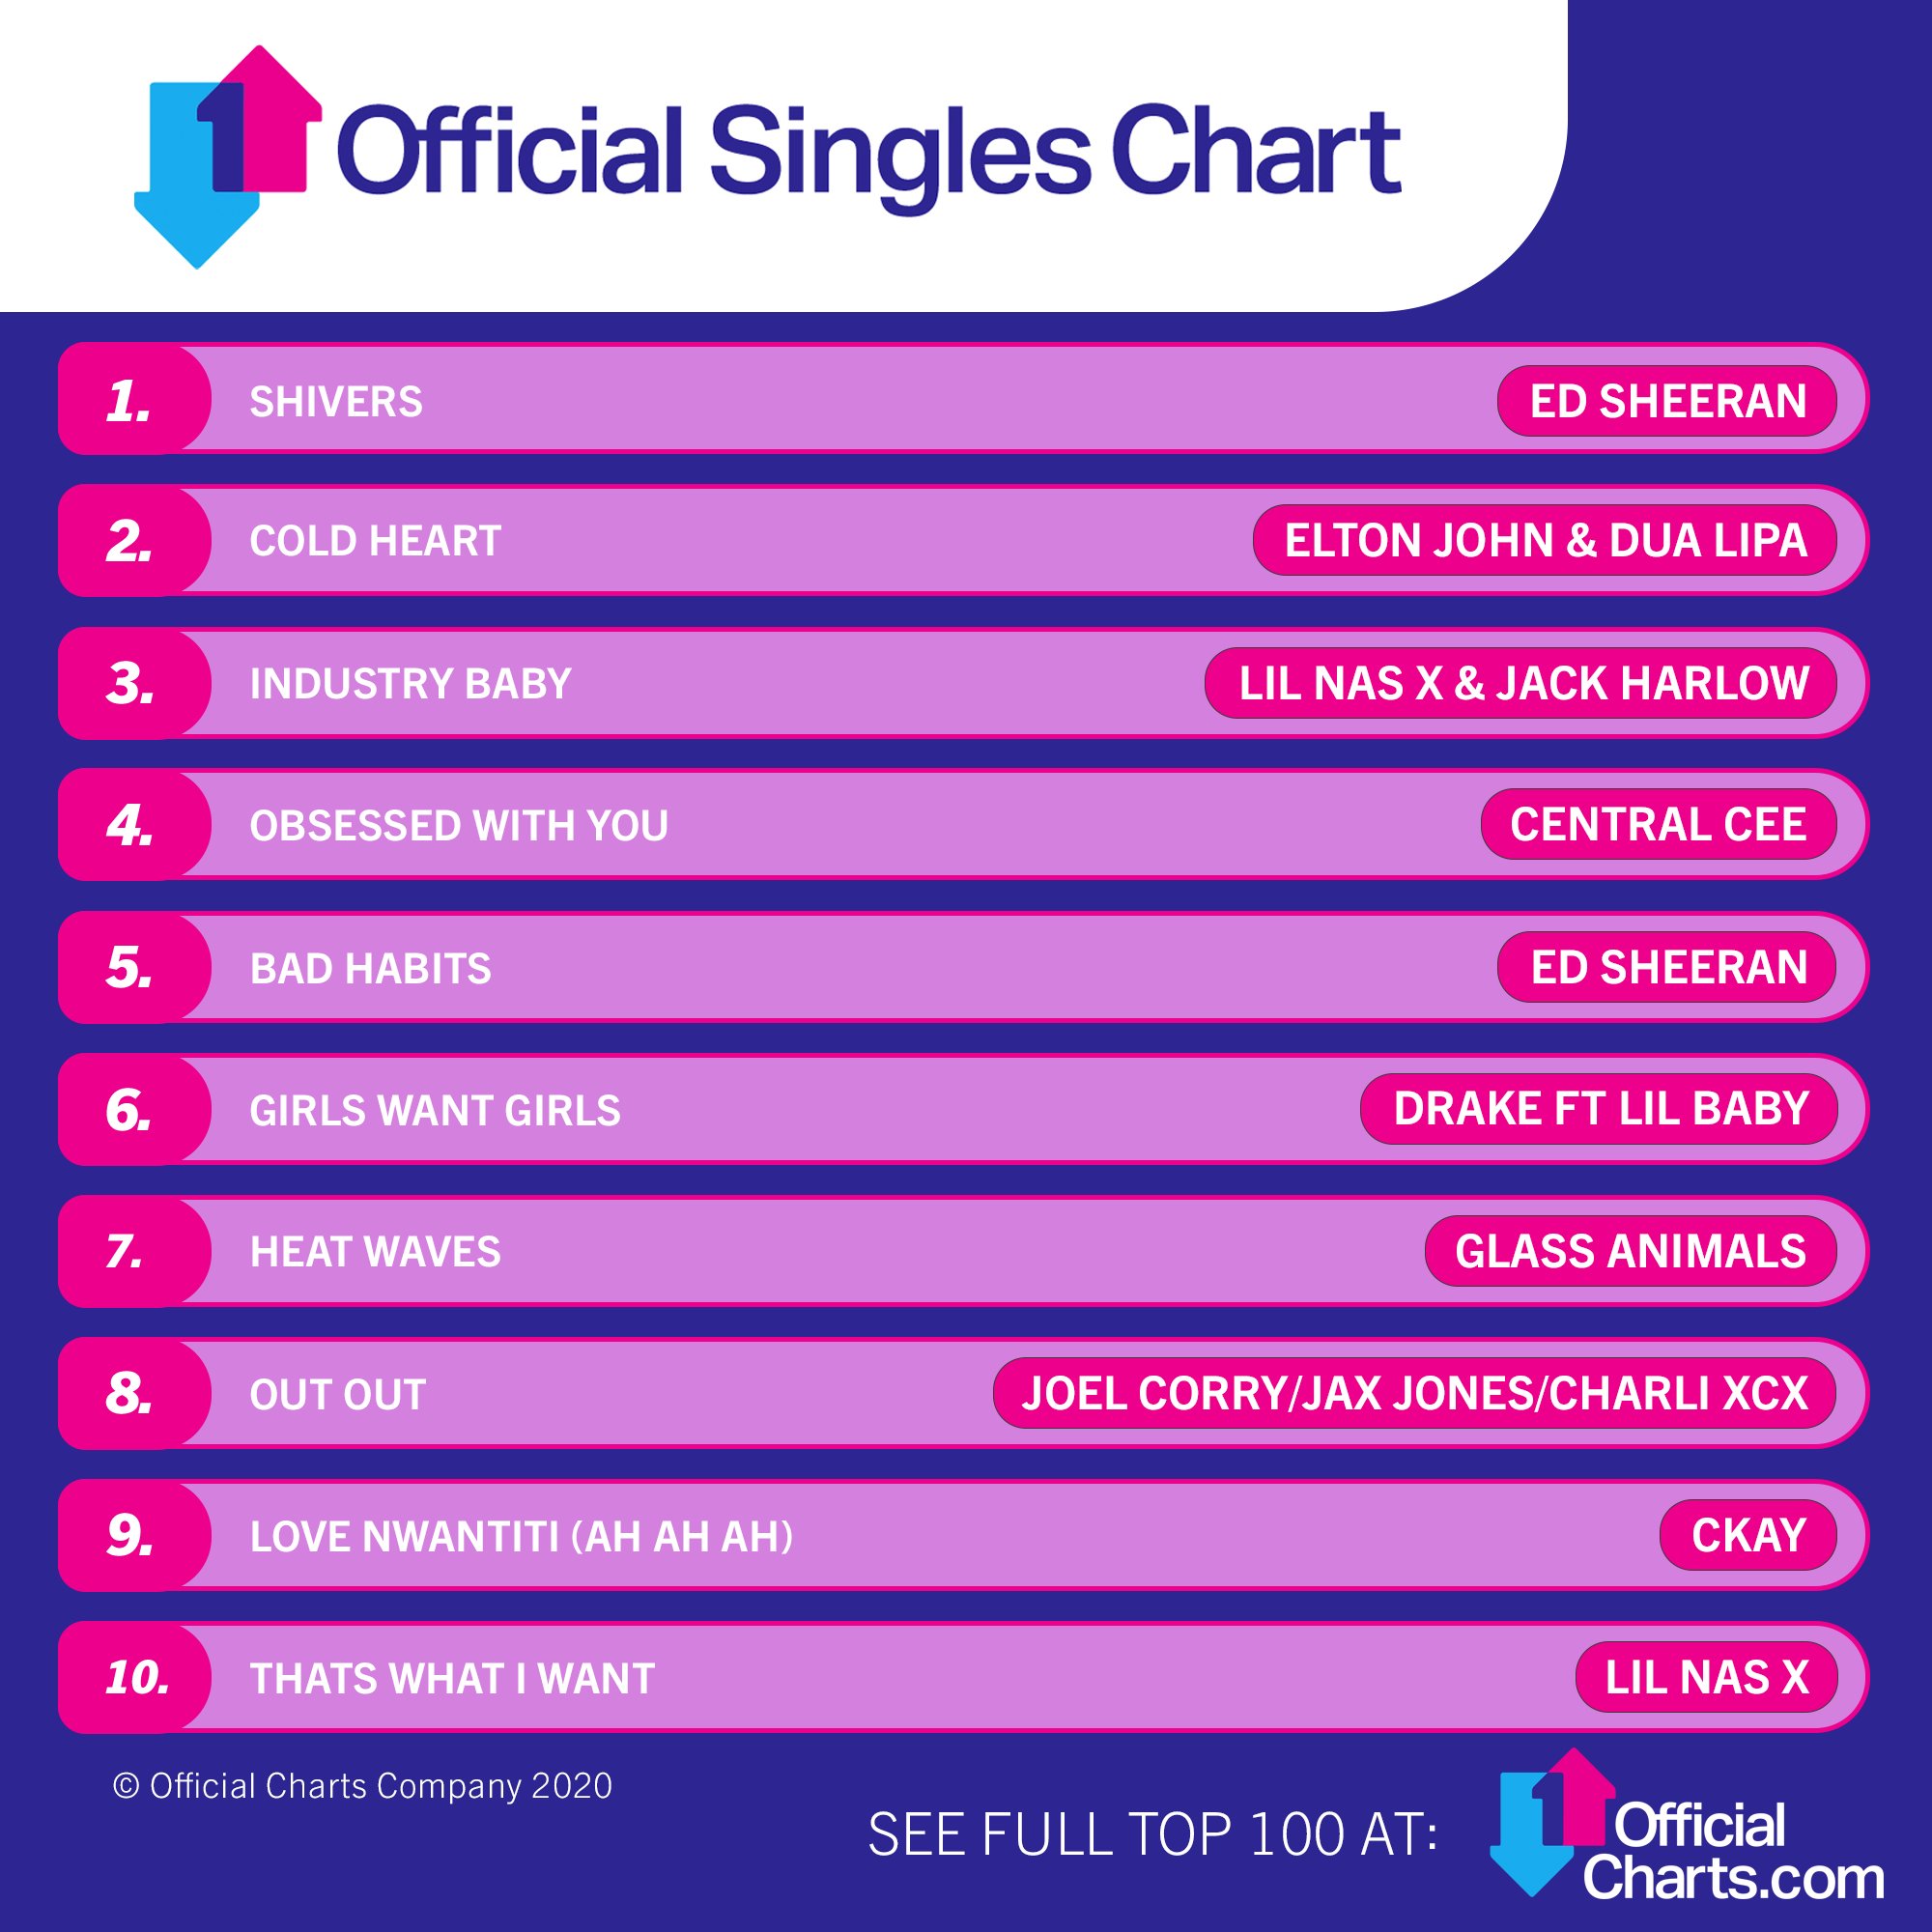 Official Charts on Twitter: "The only place you can view this week's Official UK Singles Chart is now live! See the Top 10 - and the Top 100 here: https://t.co/veo4mVZBuK https://t.co/qbmc76bXpo" /